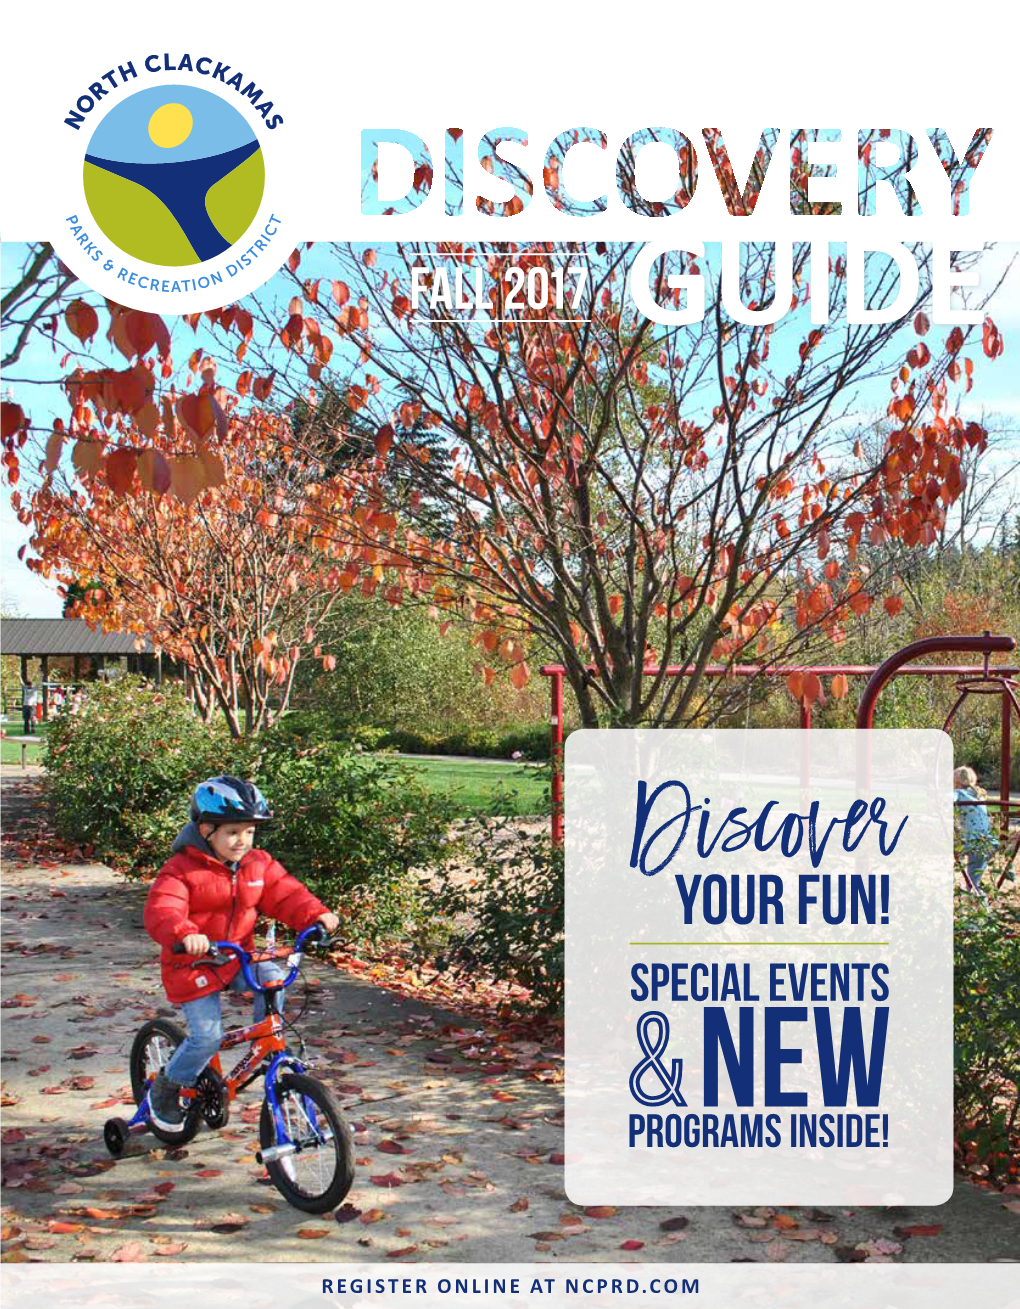 Discoveryour Fun! Special Events & New Programs Inside!